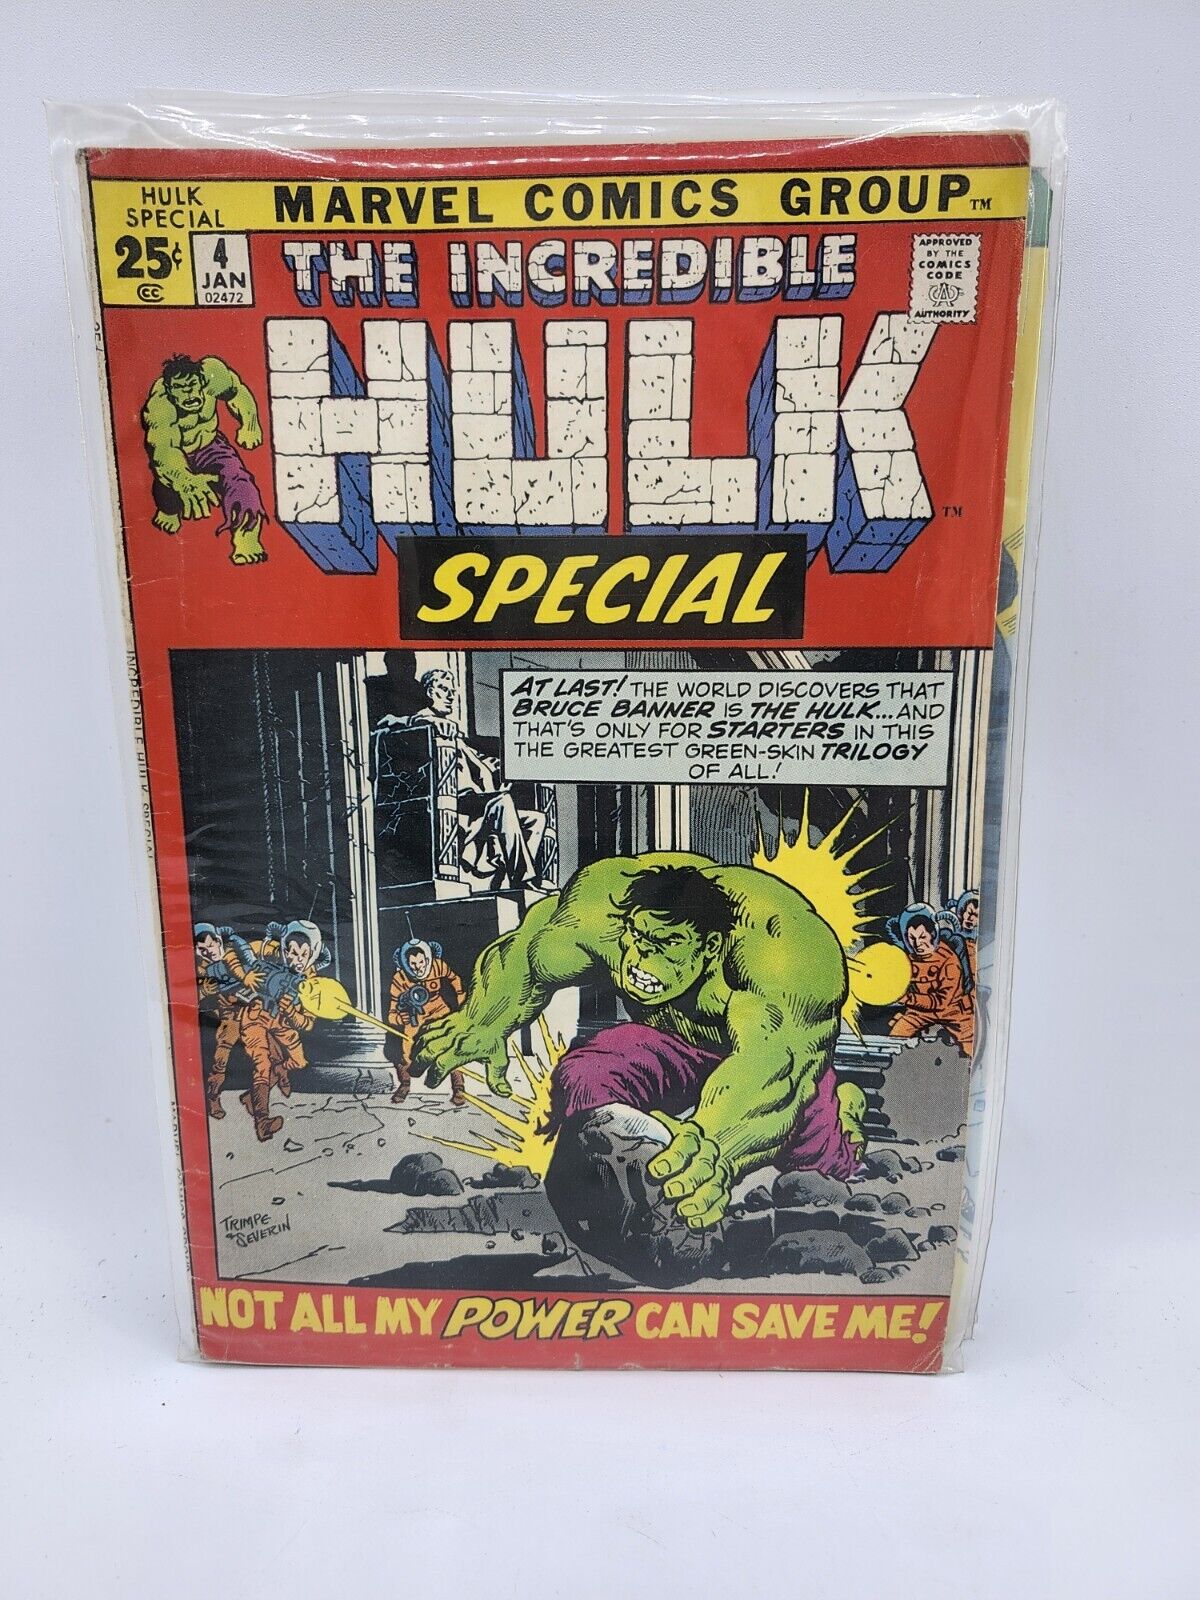 Marvel Comics Groups #4 The Incredible Hulk Special 